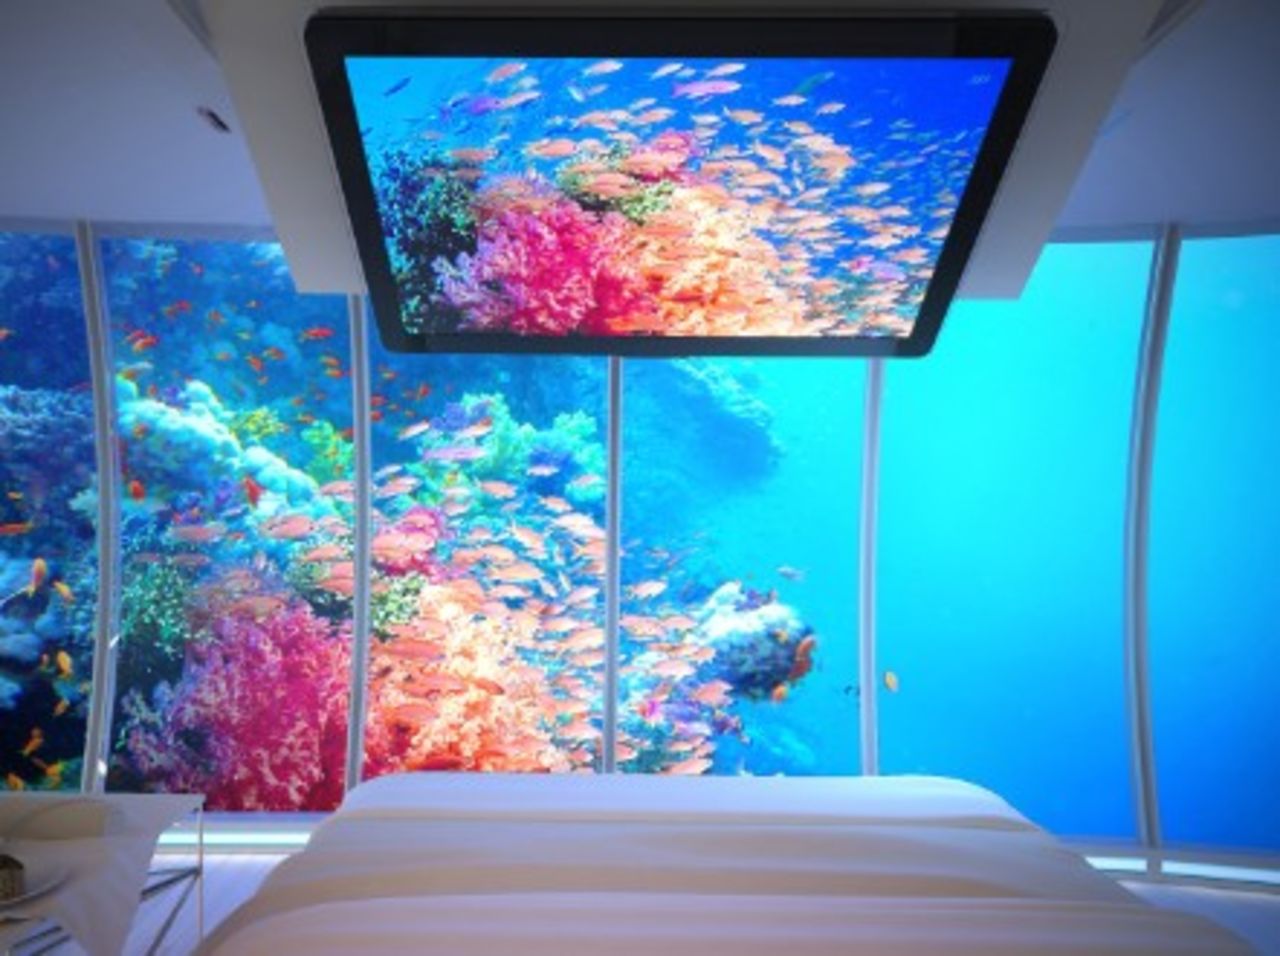 Wake up to different ocean views in the underwater hotel. - (Deep Ocean Technology)